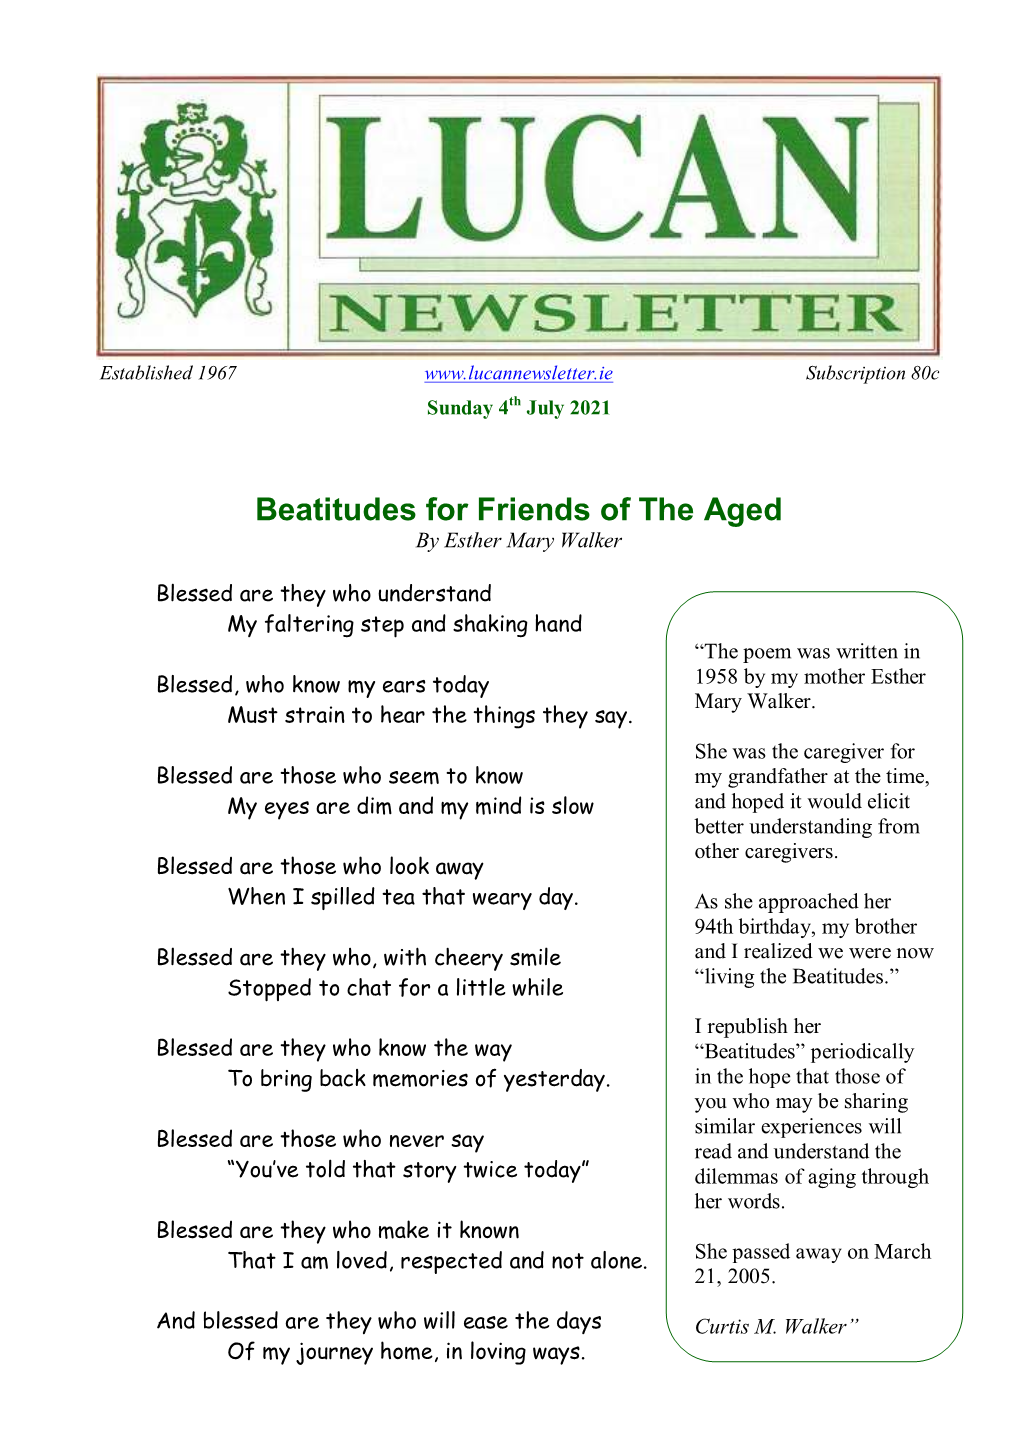 Beatitudes for Friends of the Aged by Esther Mary Walker